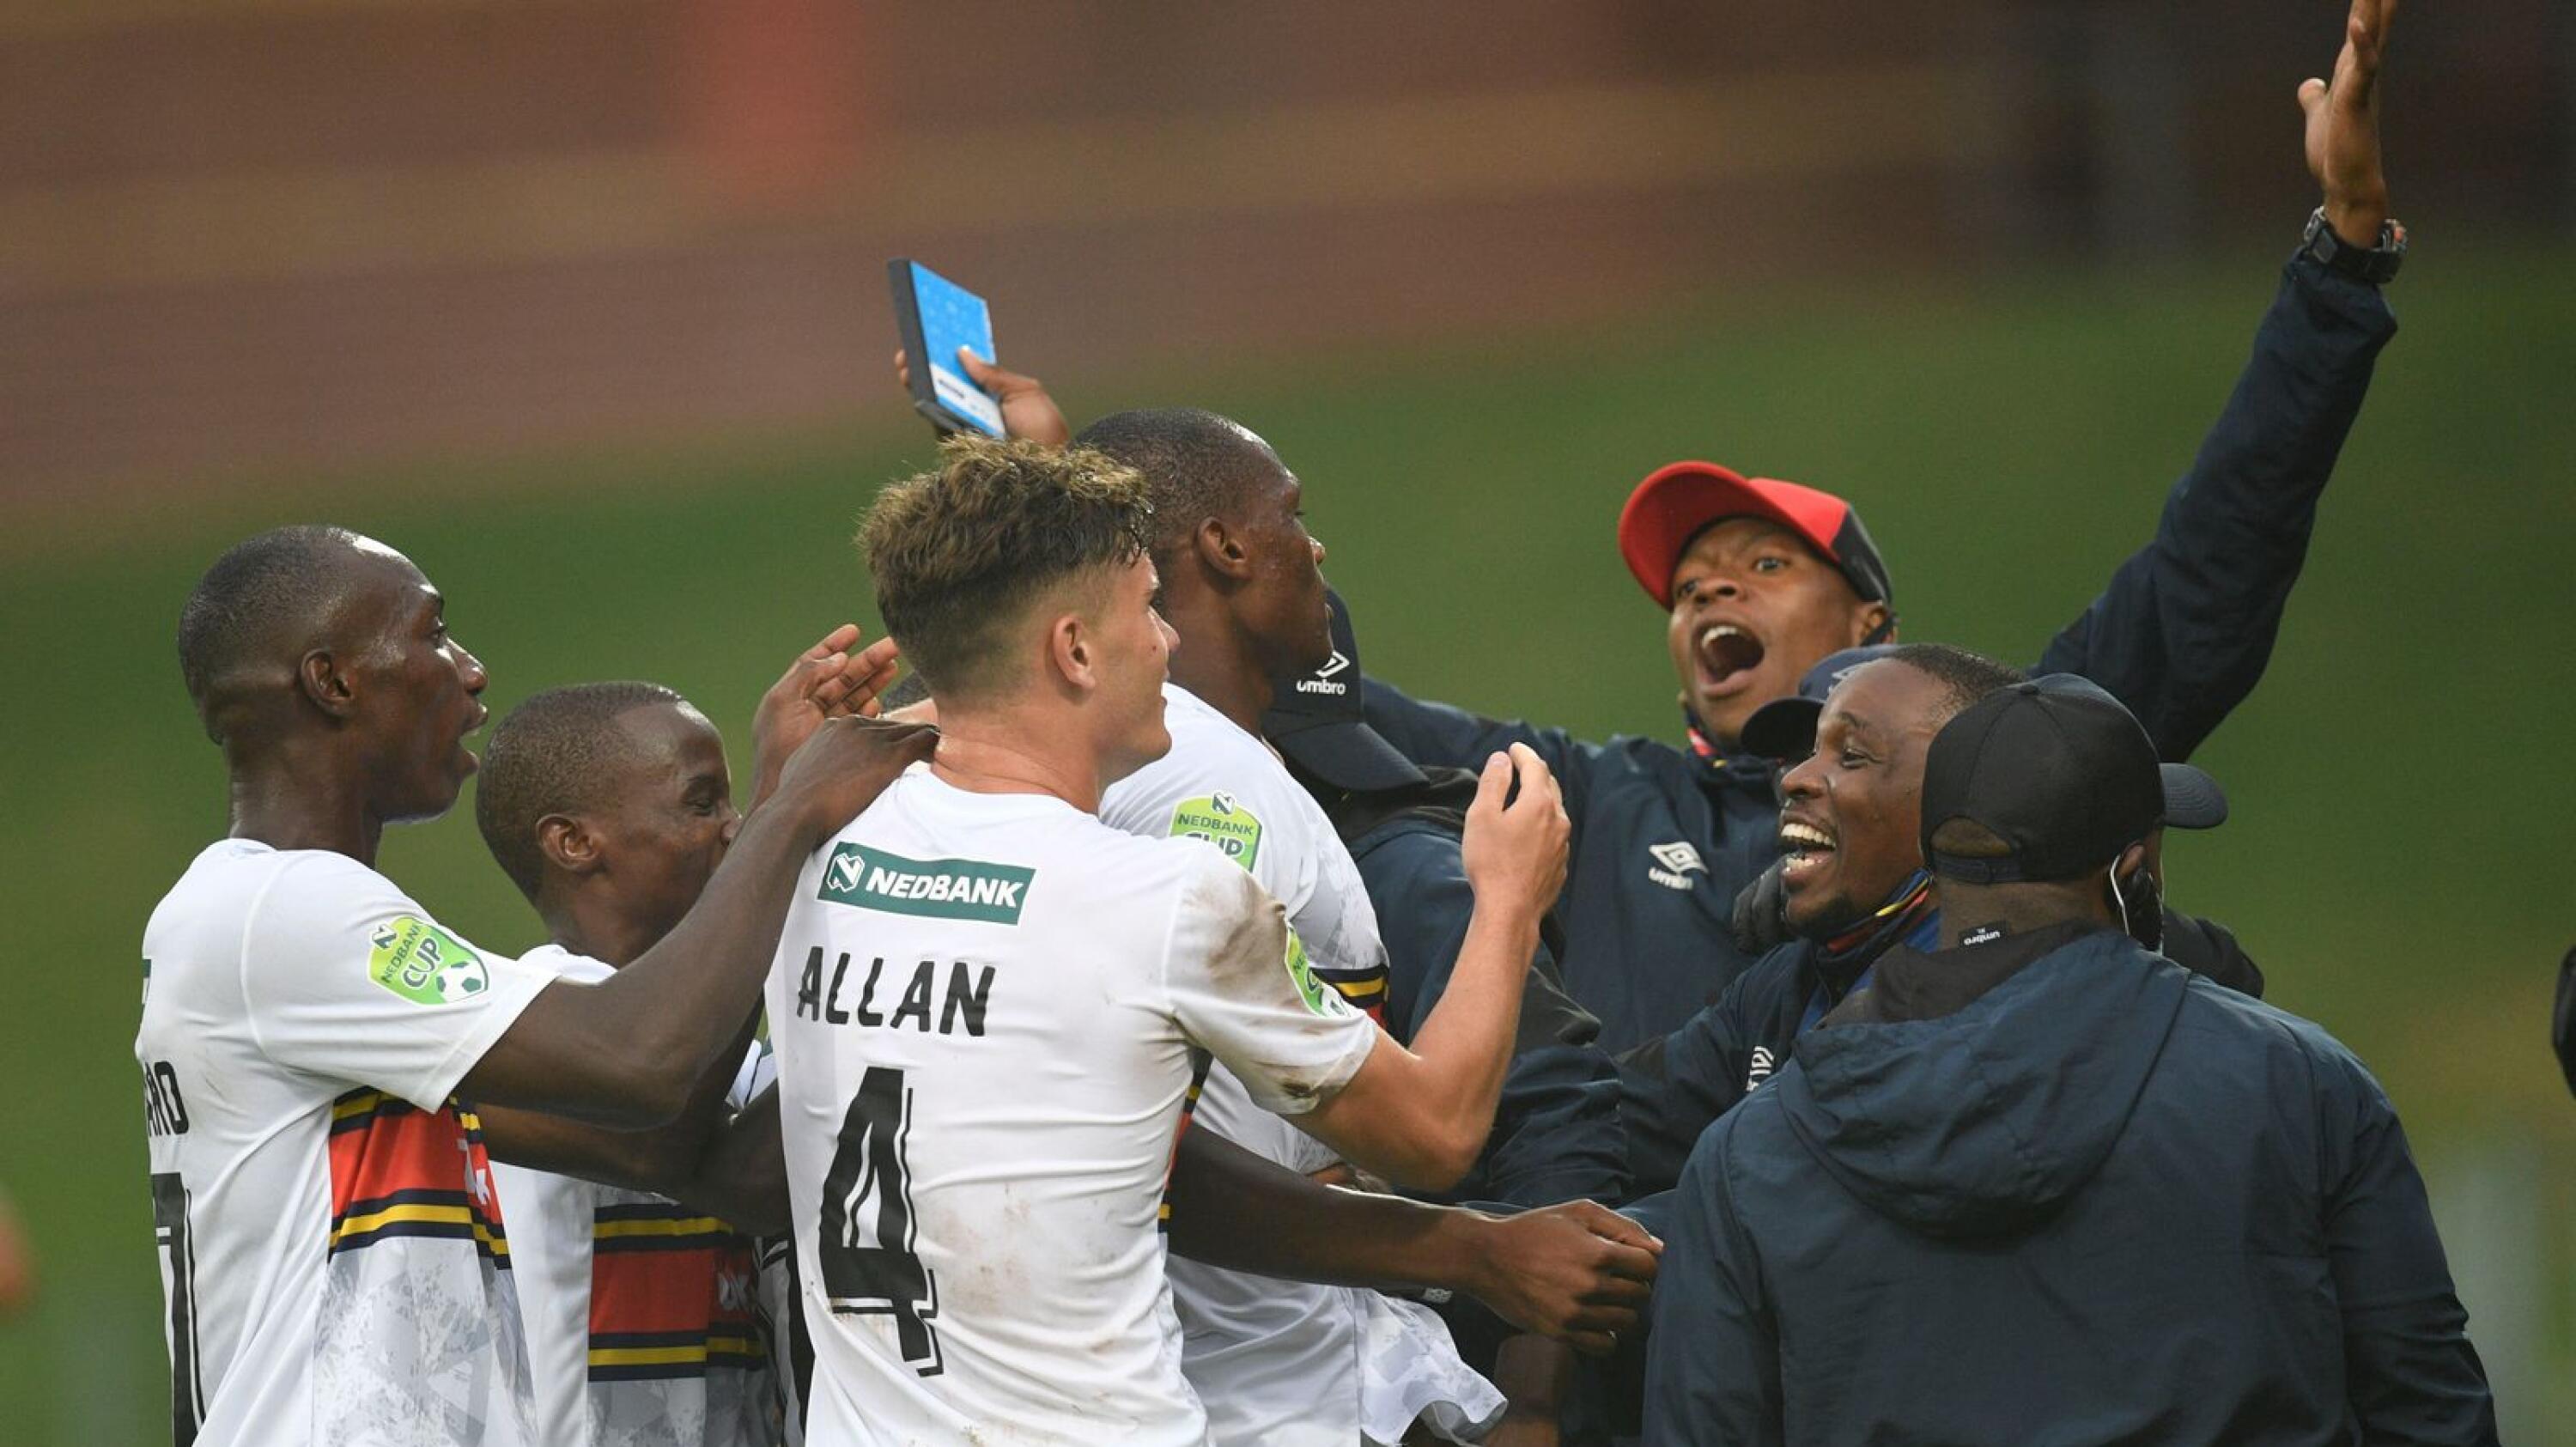 Kamohelo Pheeane of University of Pretoria celebrates with teammates after scoring goal during their Nedbank Cup Last 32 match against Chippa United at Tuks Stadium in Tshwane on Friday